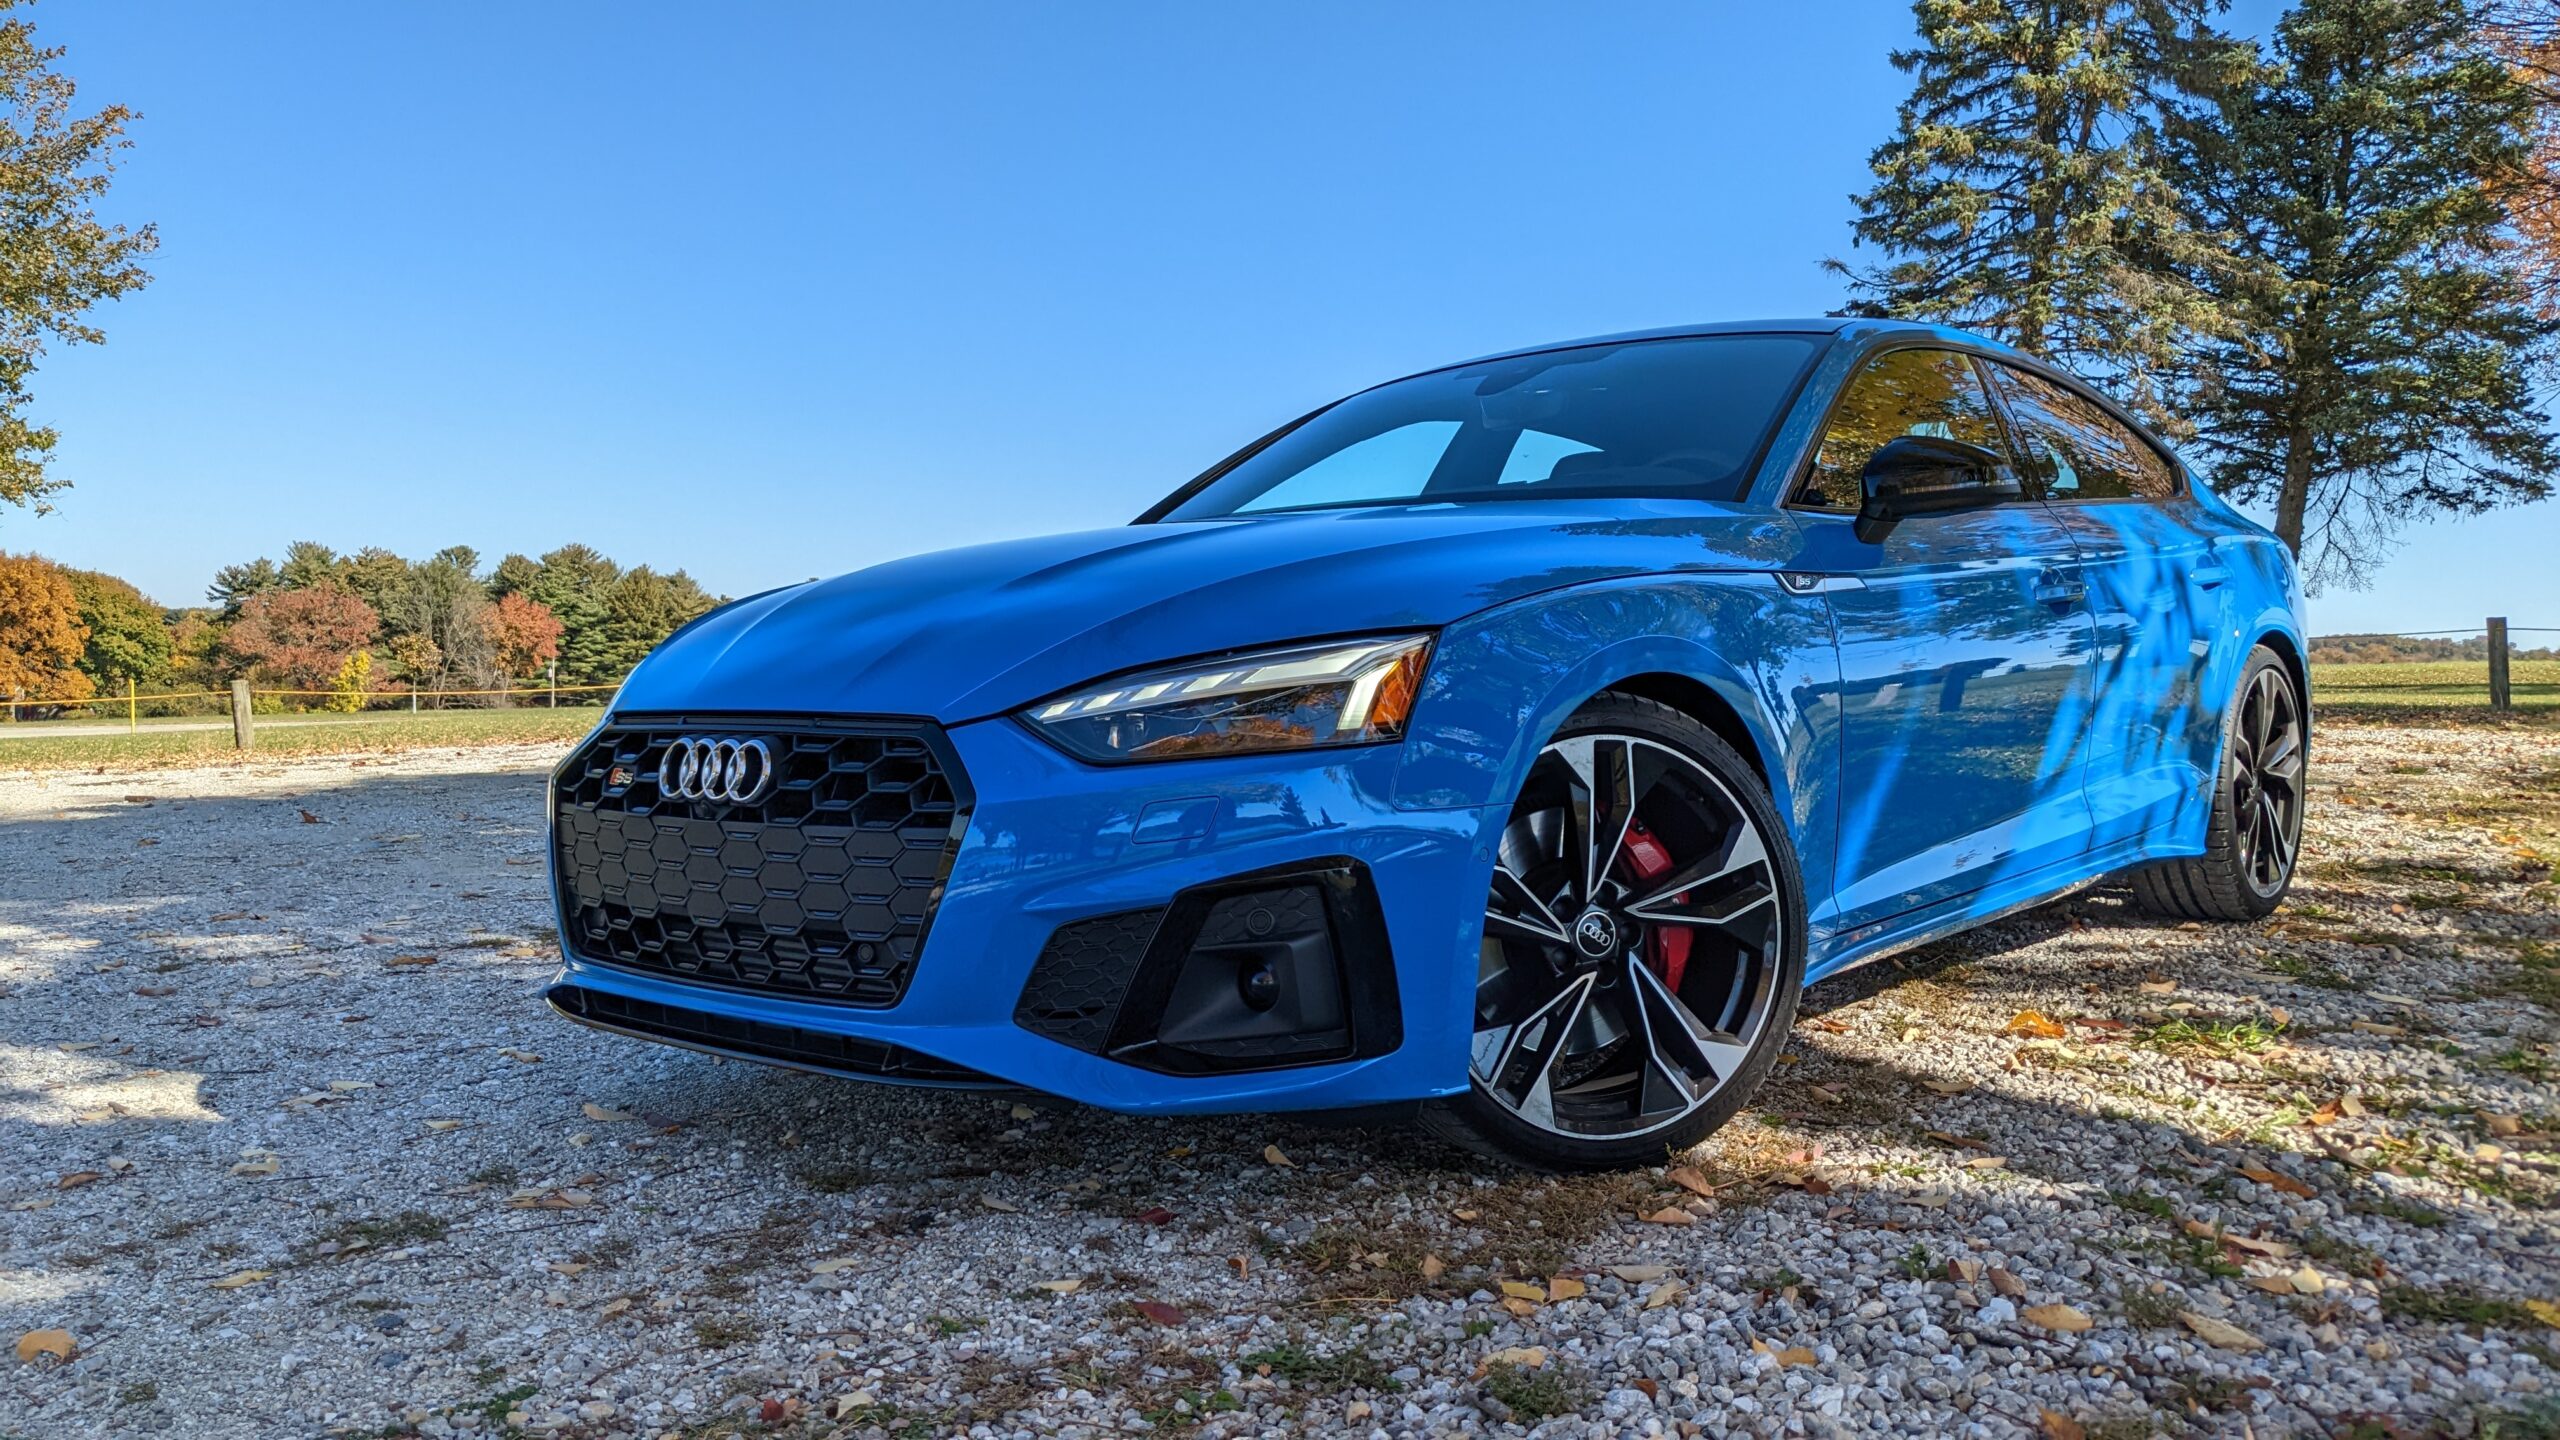 2022 Audi S5 Sportback Prestige: Pros and Cons - Right Foot Down